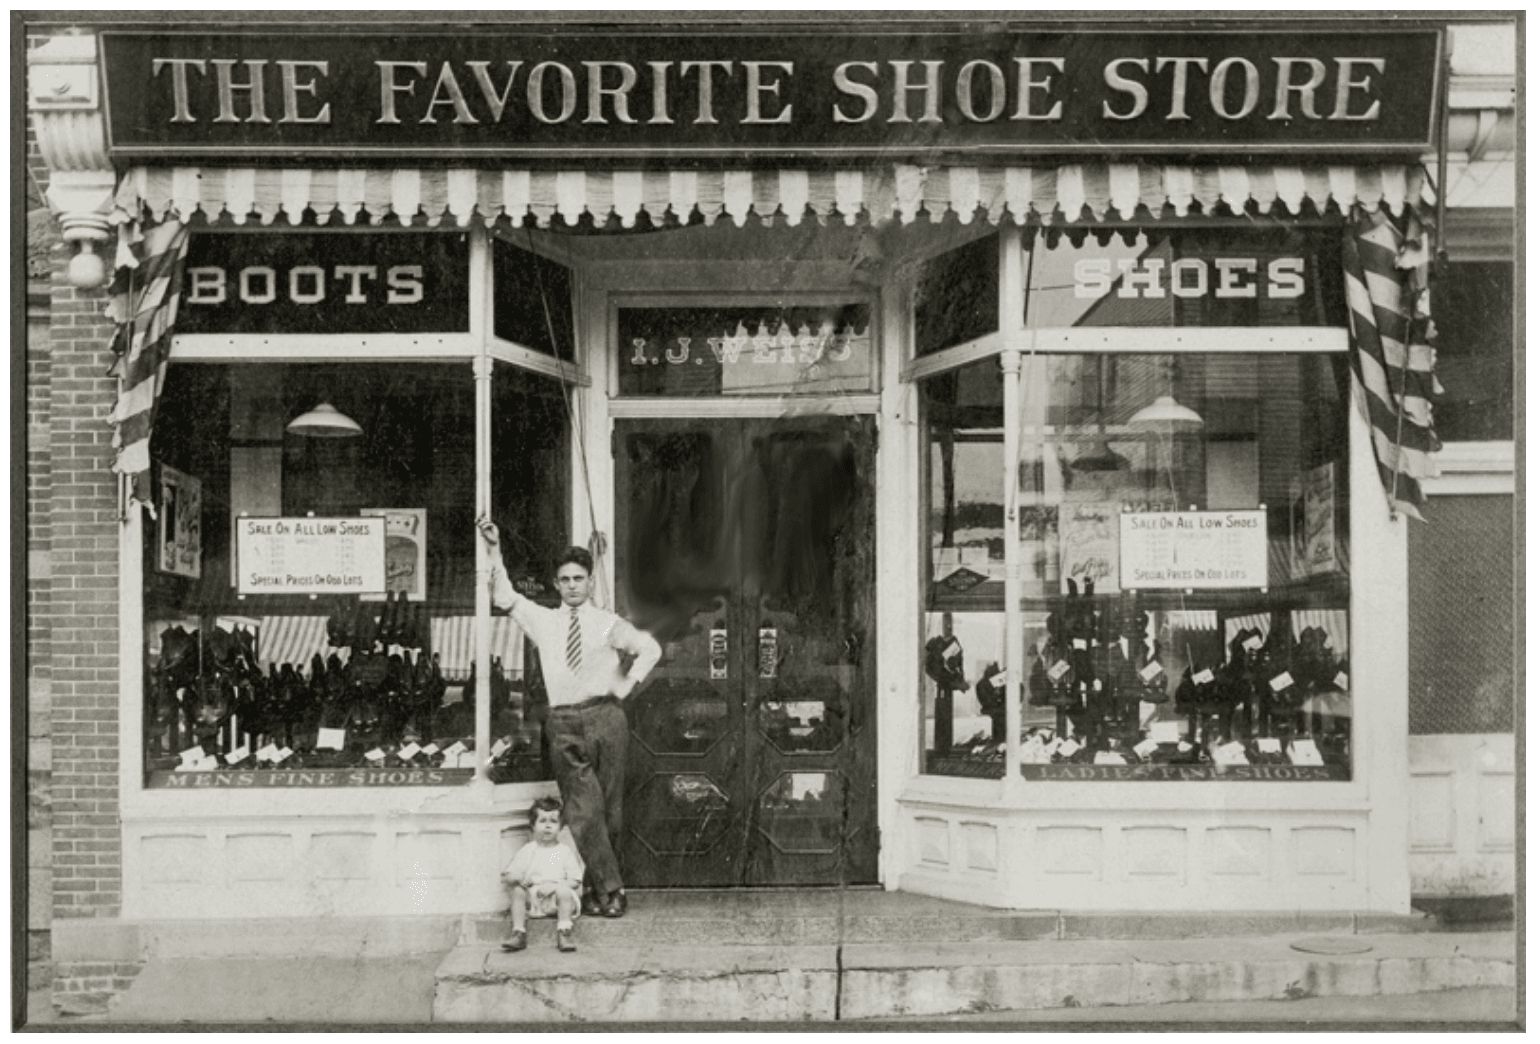 The Favorite Shoe Store, Greenwich, ct